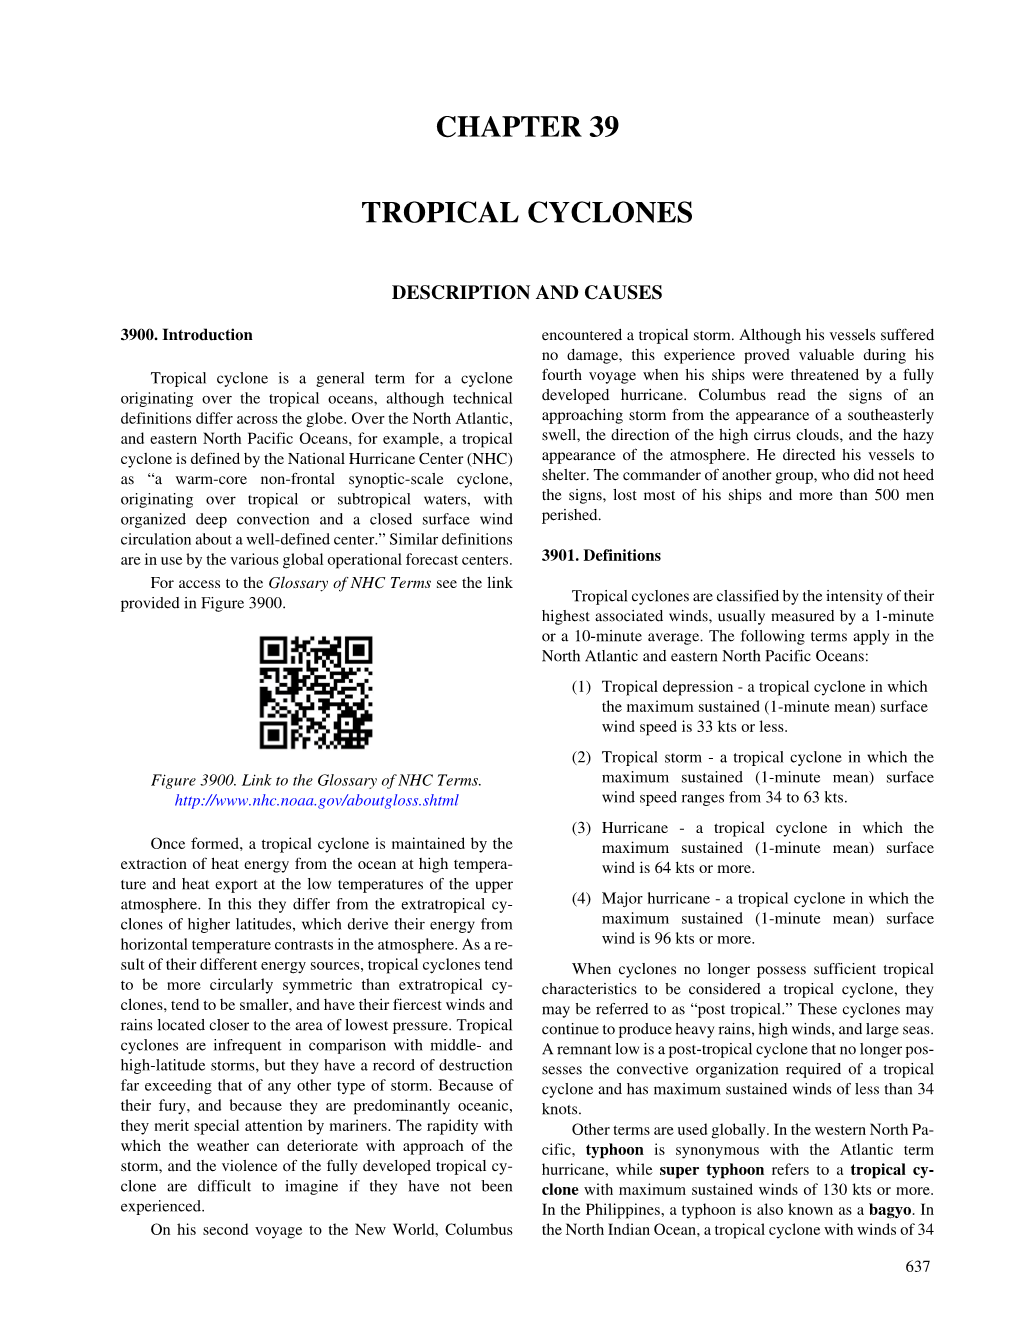 Chapter 39 Tropical Cyclones